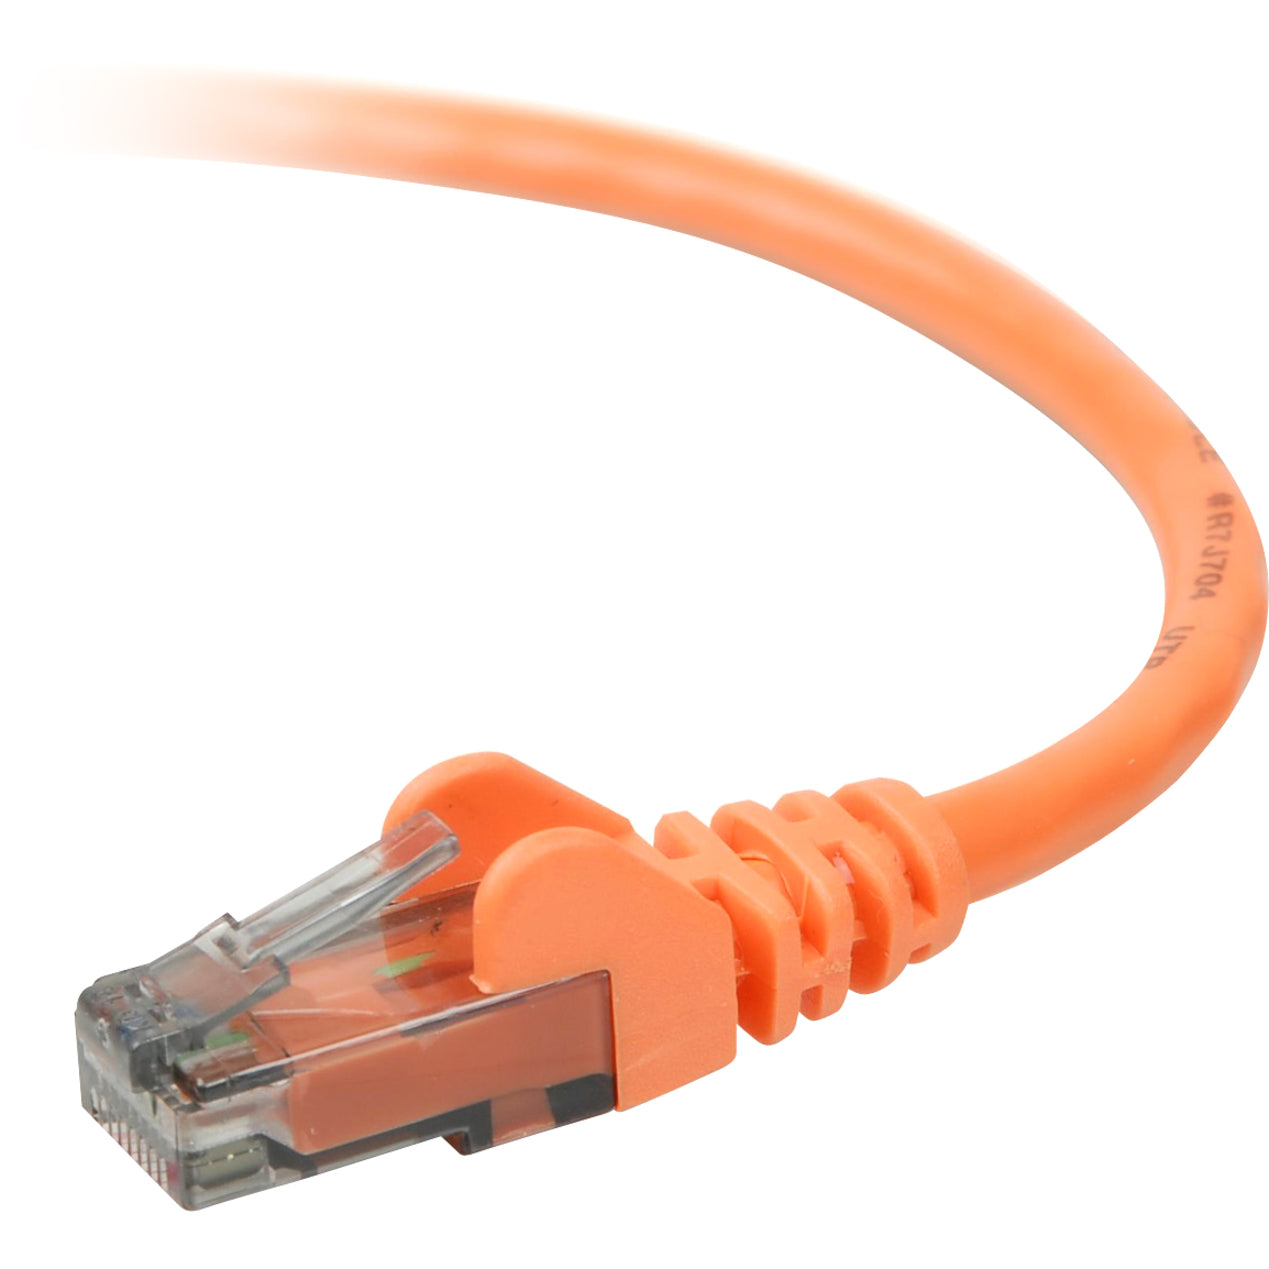 Belkin A3L980-03-ORG-S 900 Series Cat. 6 UTP Patch Cable, 3 ft, Snagless, Orange